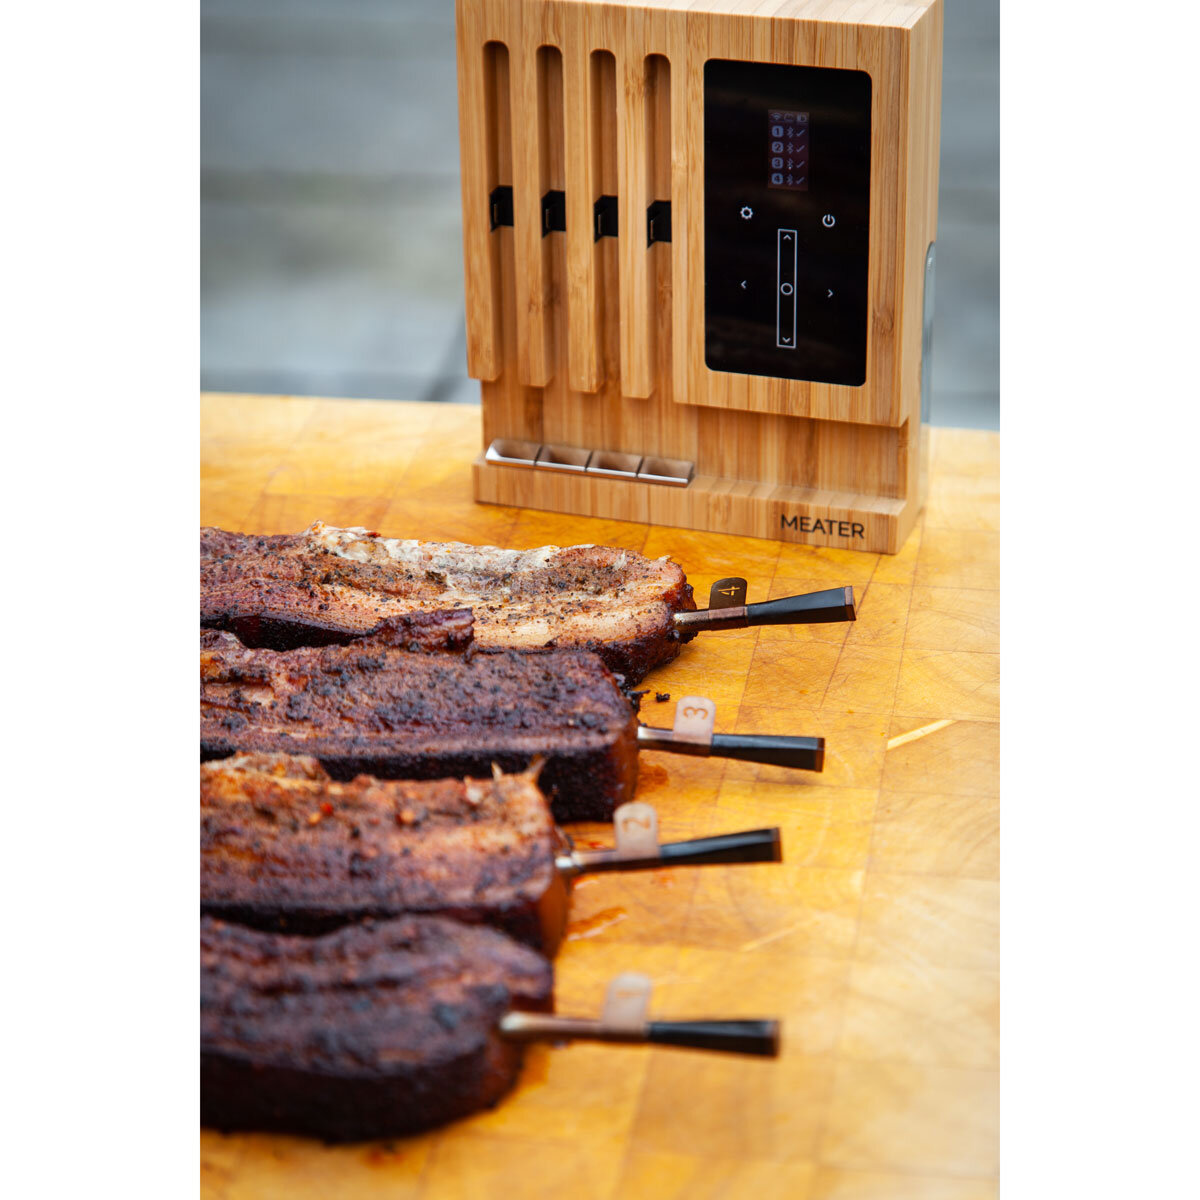 MEATER Block Set of 4 Digital Meat Thermometers, Honey - Worldshop